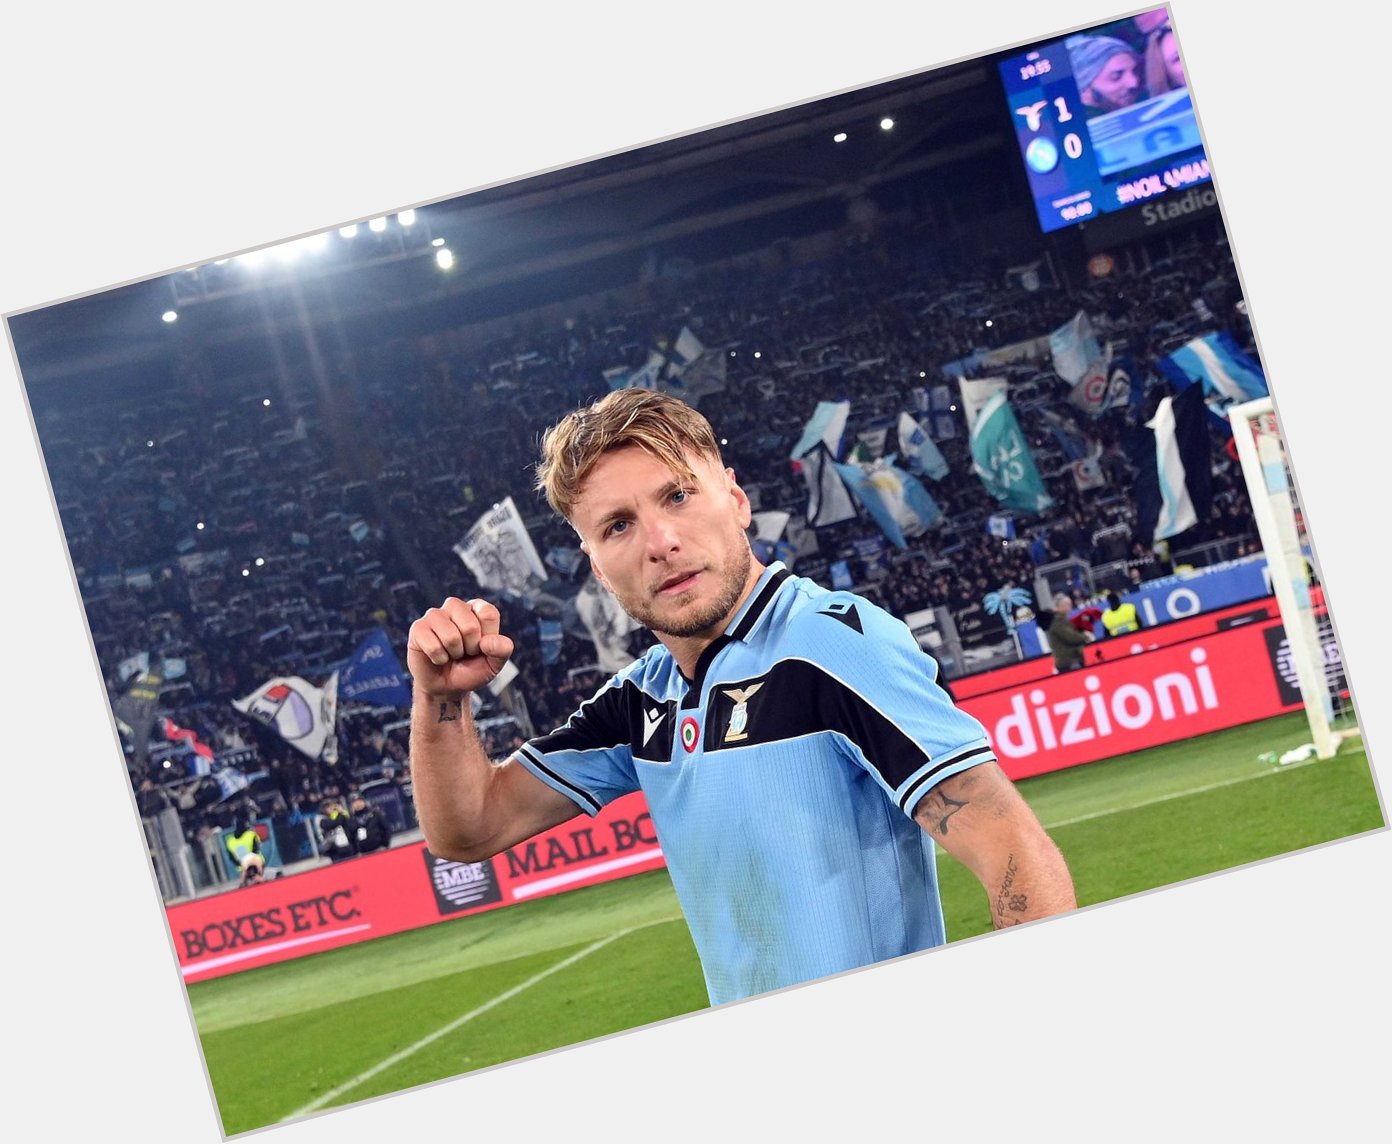 Happy birthday!  Ciro Immobile in Serie A this year:

24 games
26 goals  